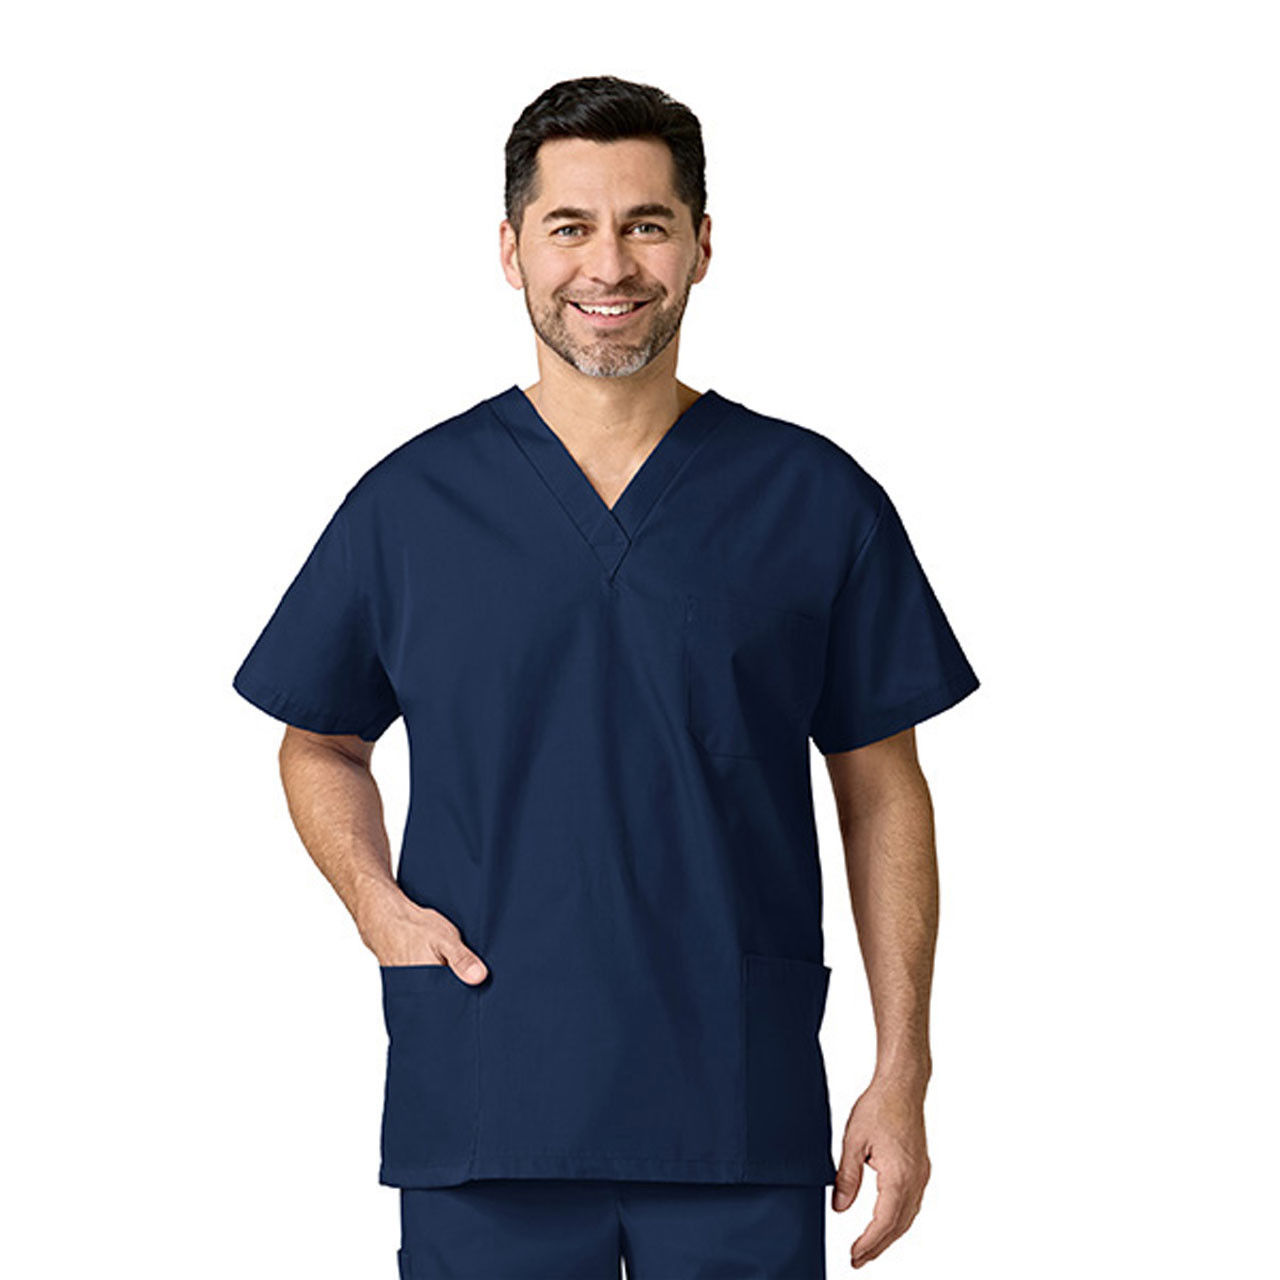 Are the Navy Blue Scrub Tops unisex?